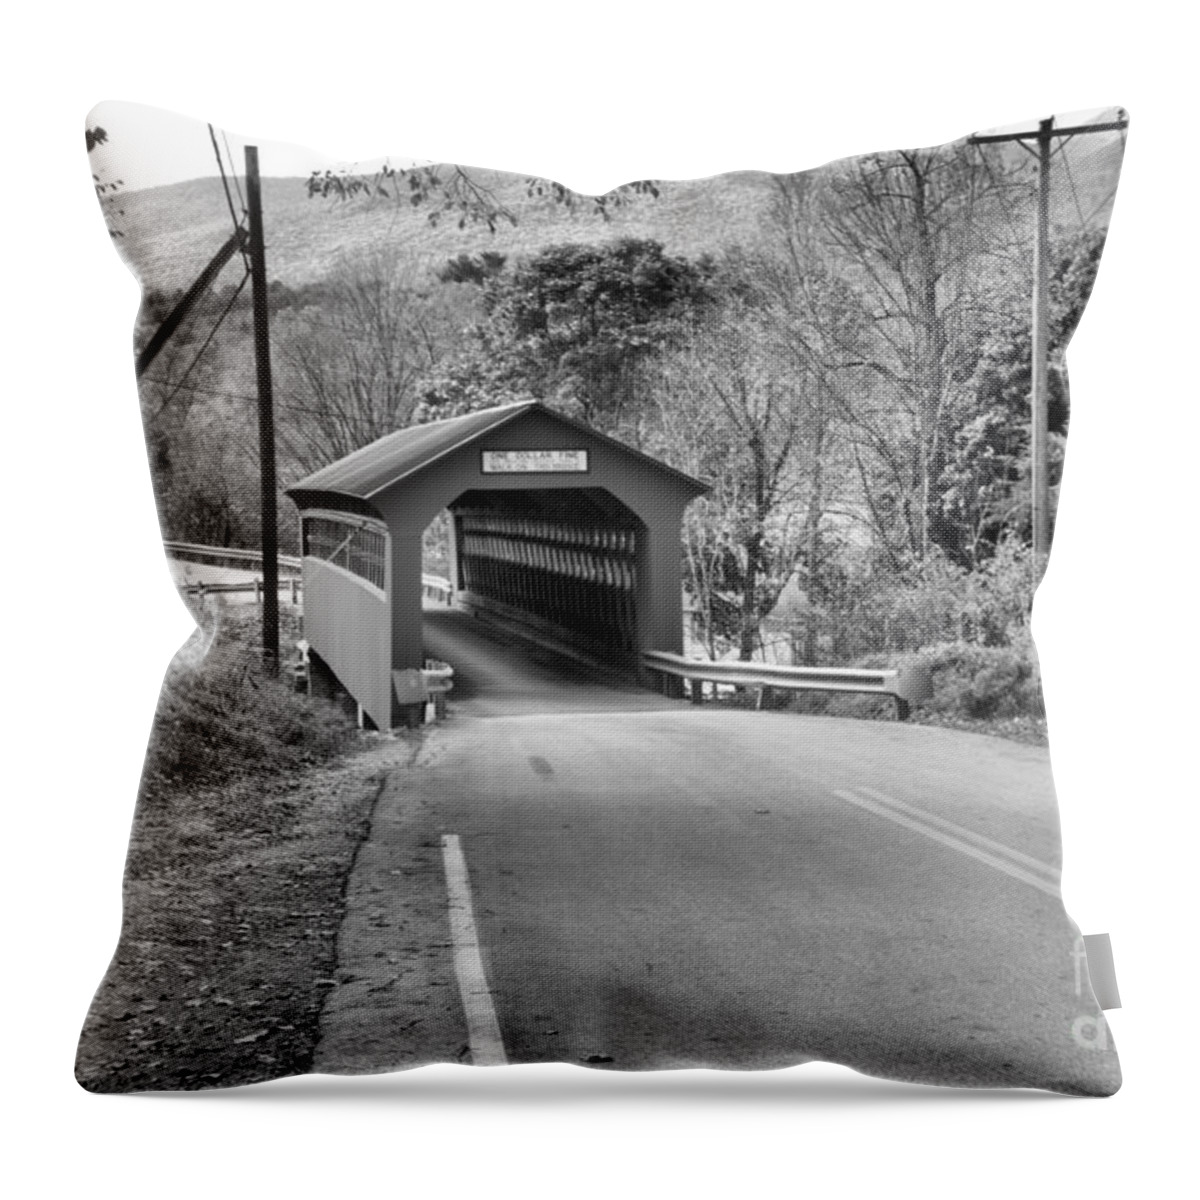 Chiselville Covered Bridge Throw Pillow featuring the photograph Looking Down On The Chiselville Covered Bridge Black And White by Adam Jewell